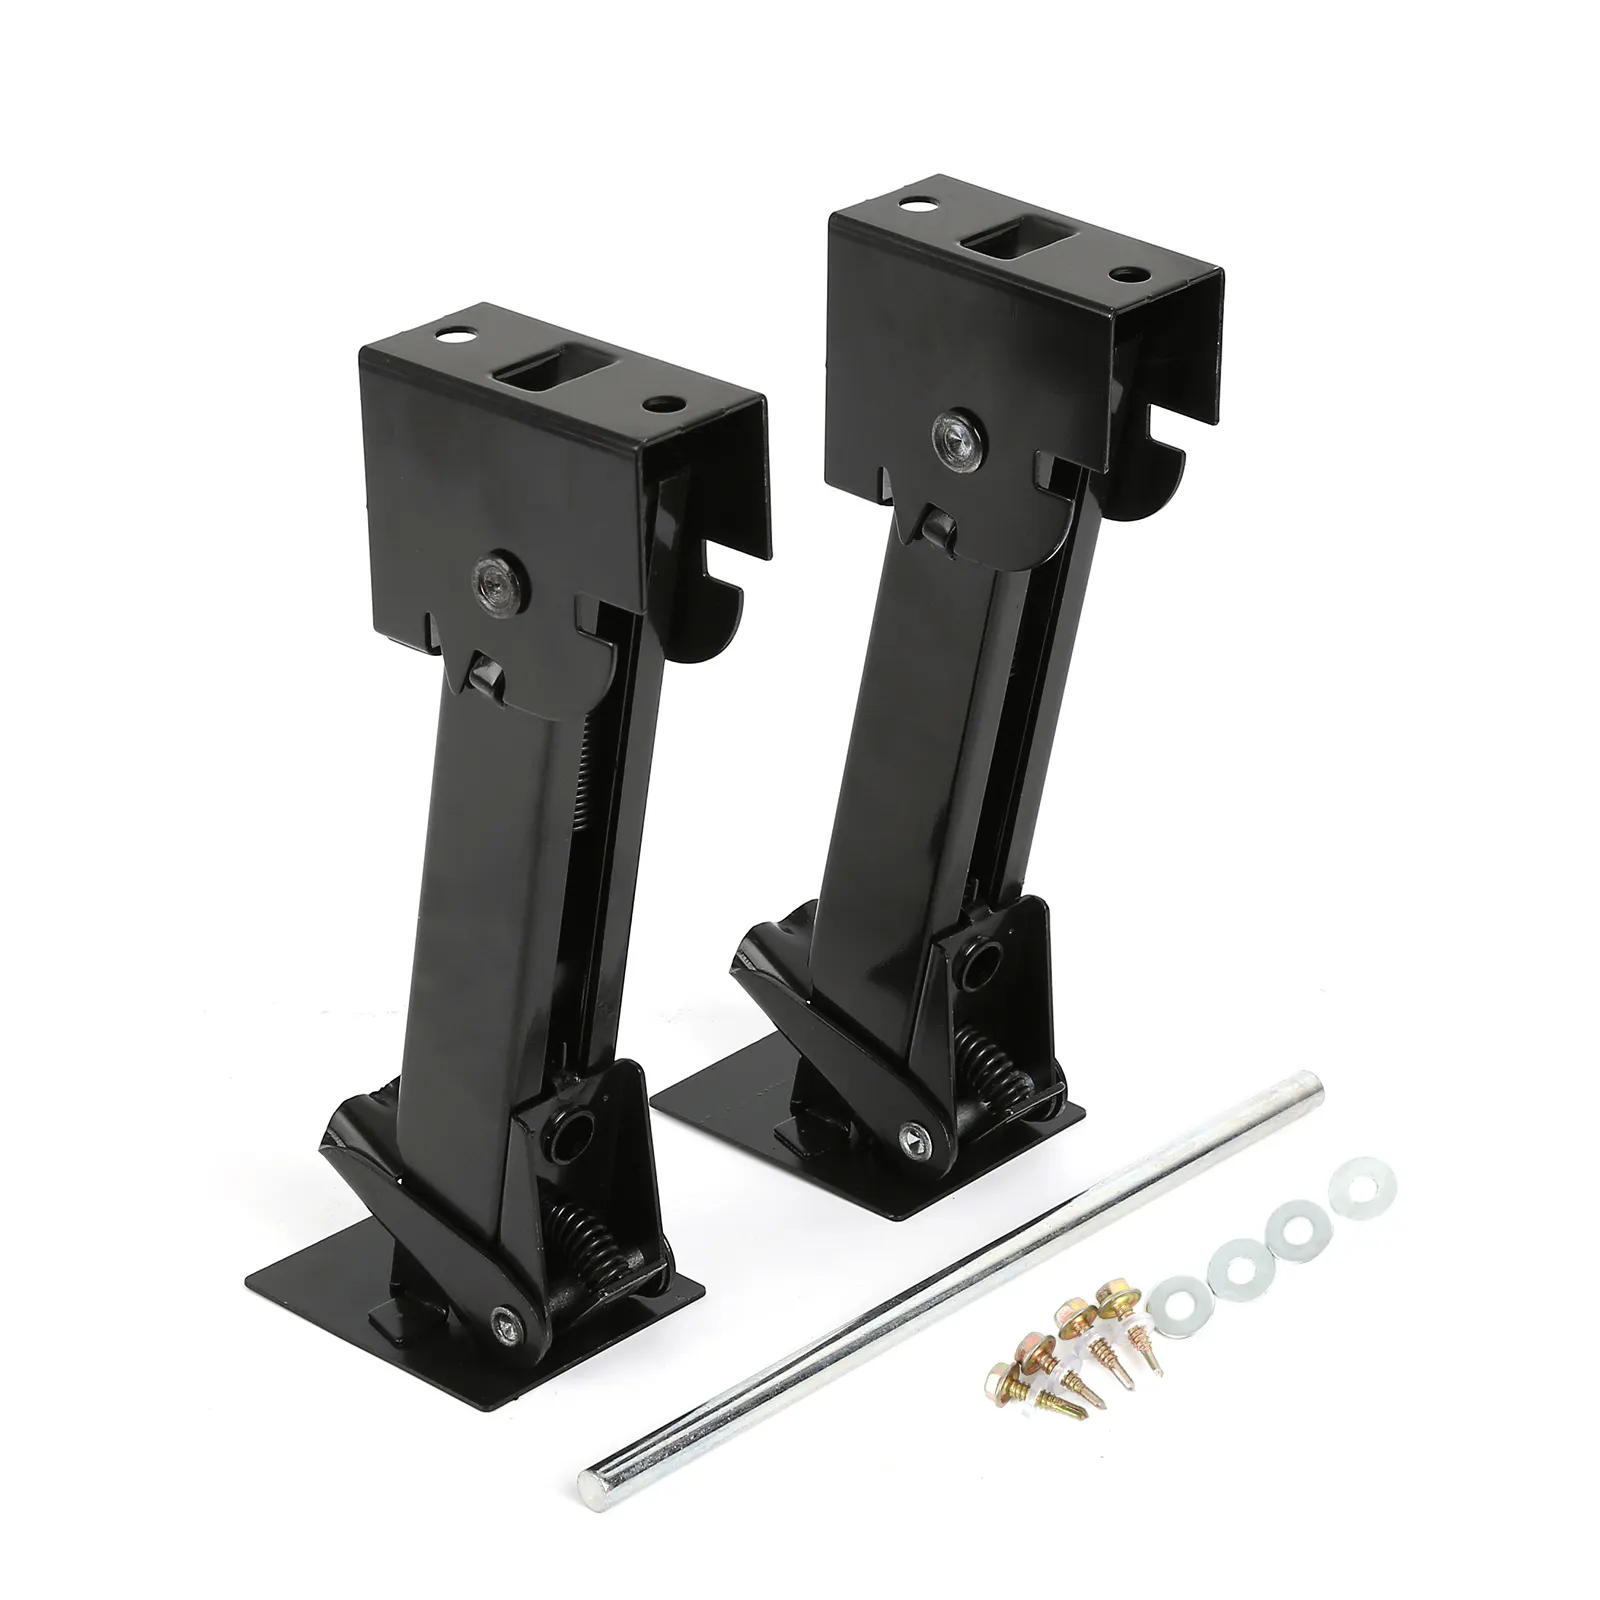 Winmax 2pcs Trailer Stabilizer Jack Useful Trailer Support Stabilizer Suitable for Outdoor Travel Camping Vans and Caravan